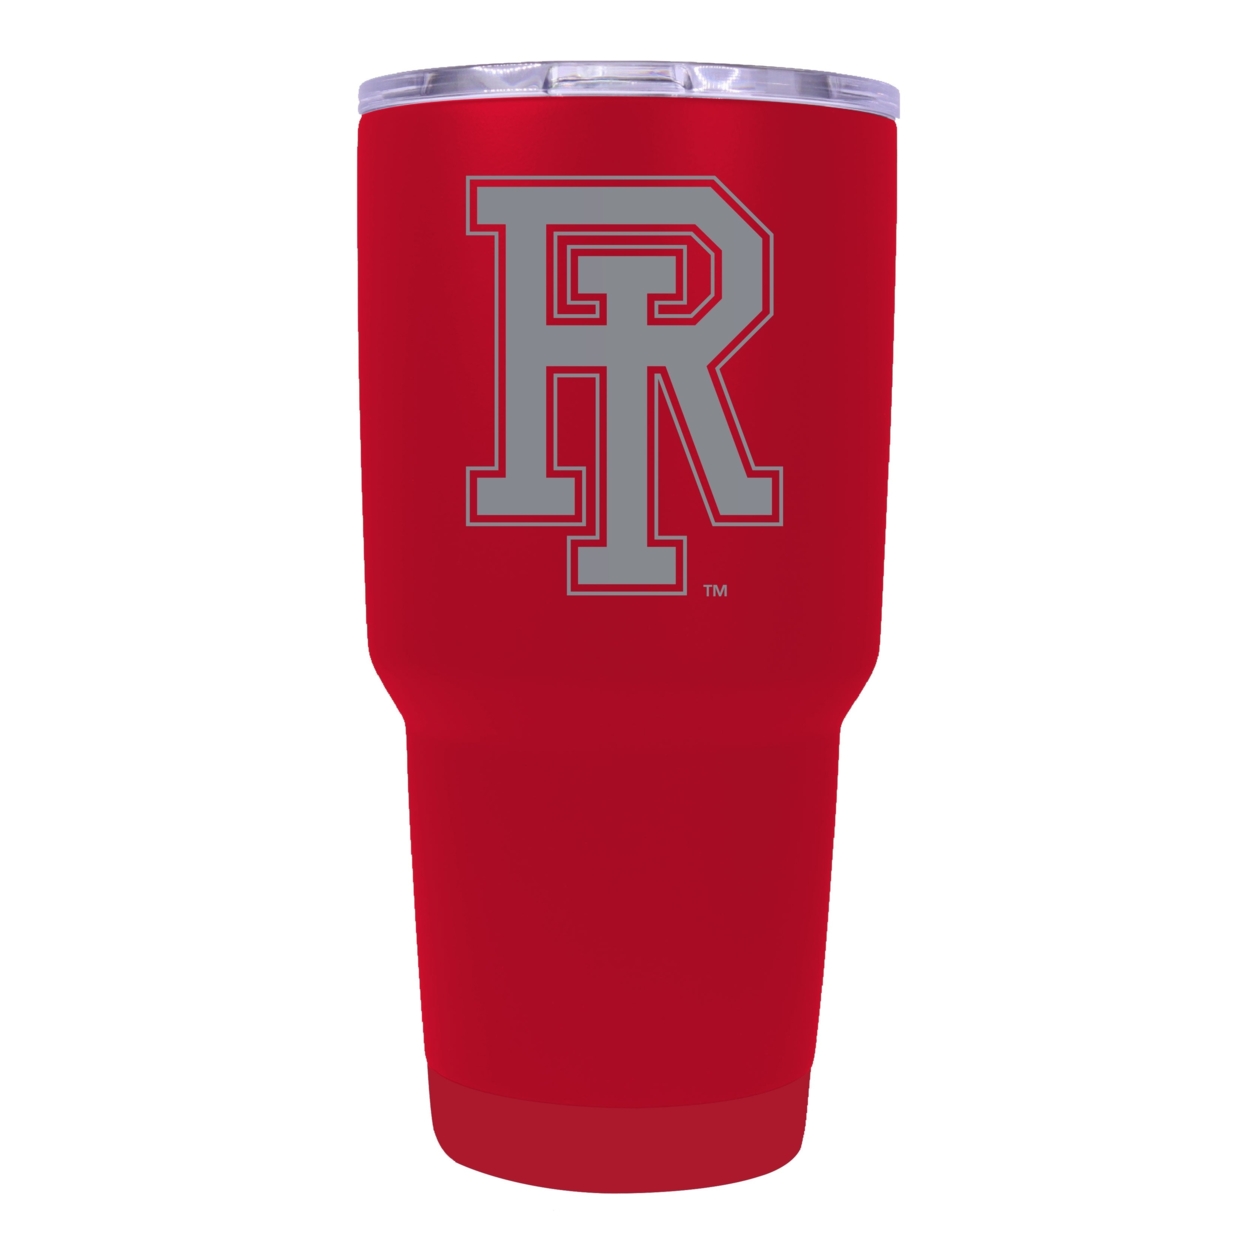 Rhode Island University 24 Oz Laser Engraved Stainless Steel Insulated Tumbler - Choose Your Color. - Coral